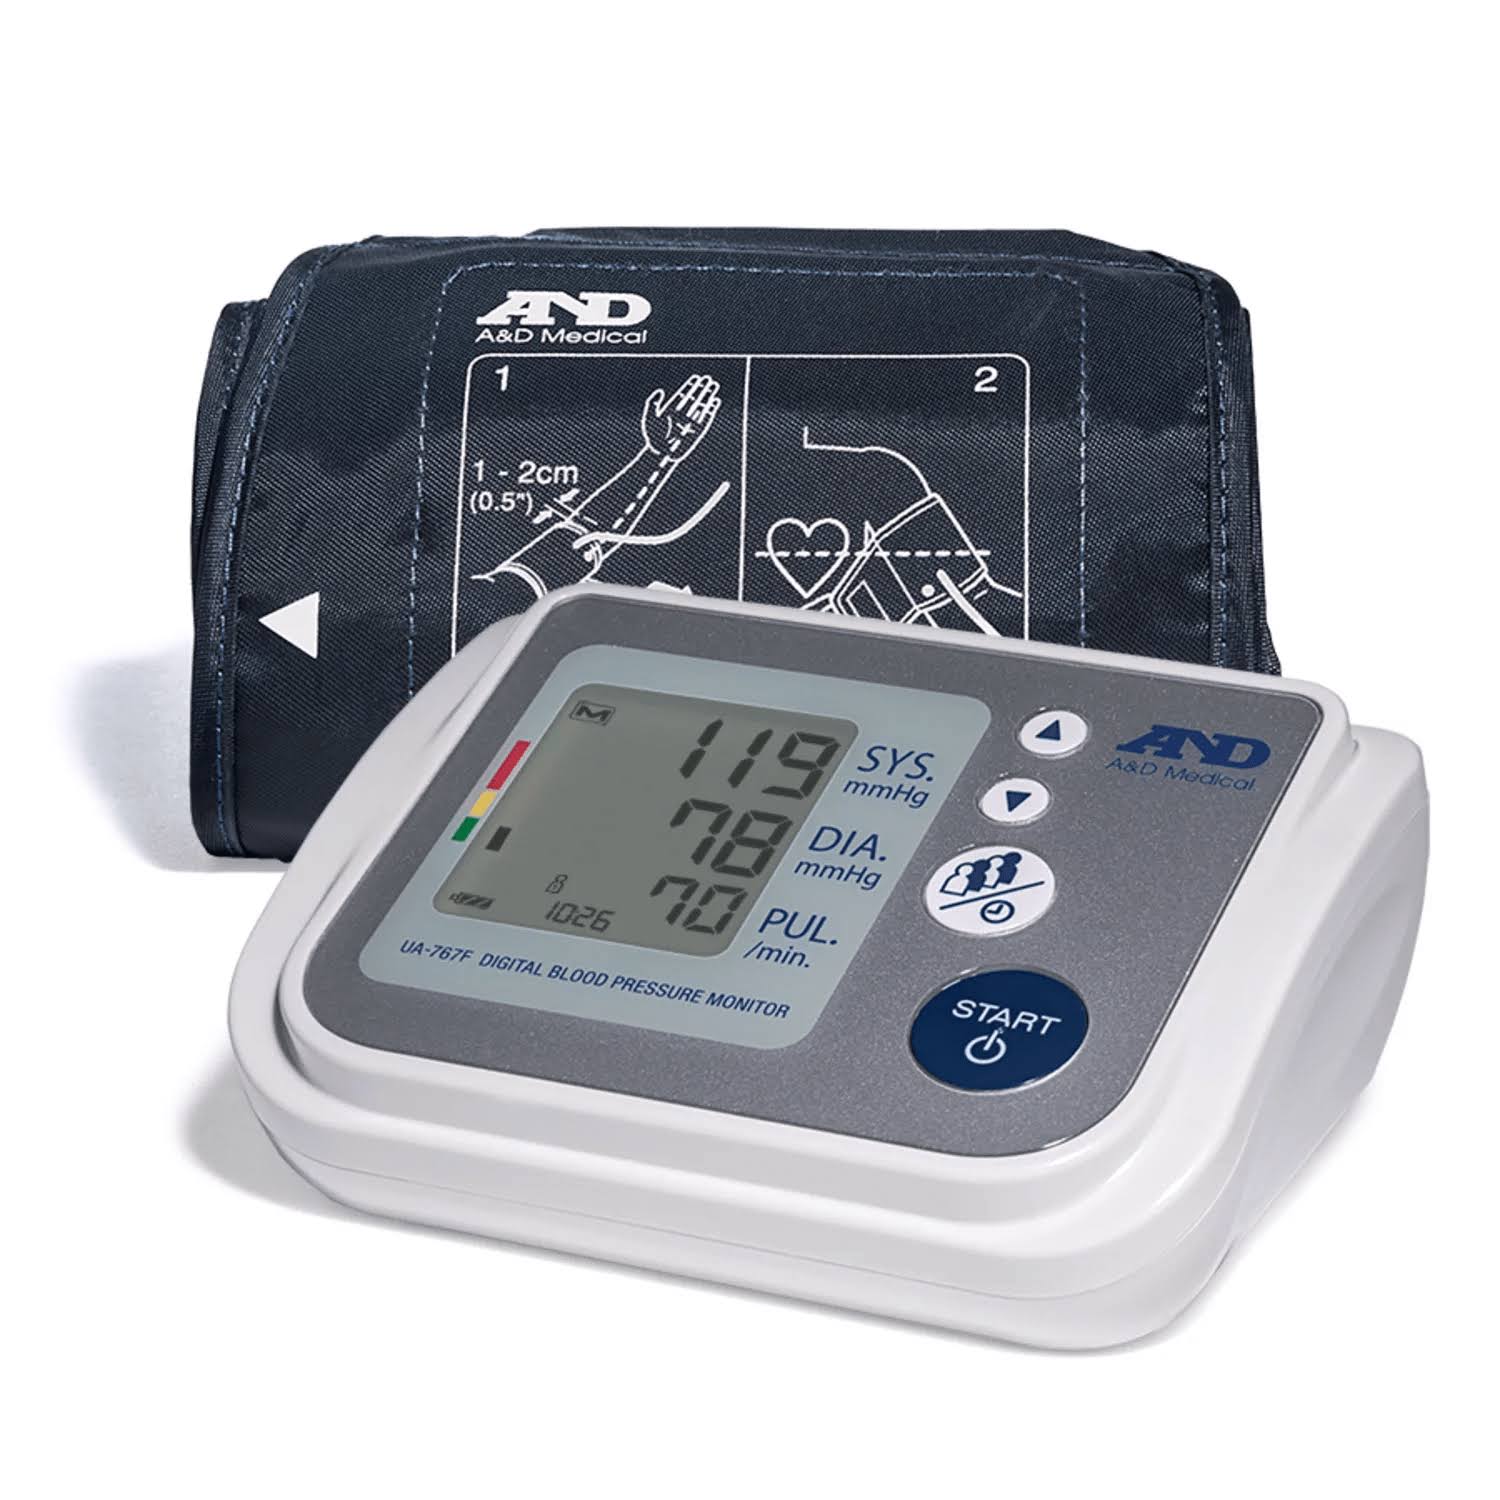 A and D Medical Deluxe Upper Arm Blood Pressure Monitor with Bluetooth